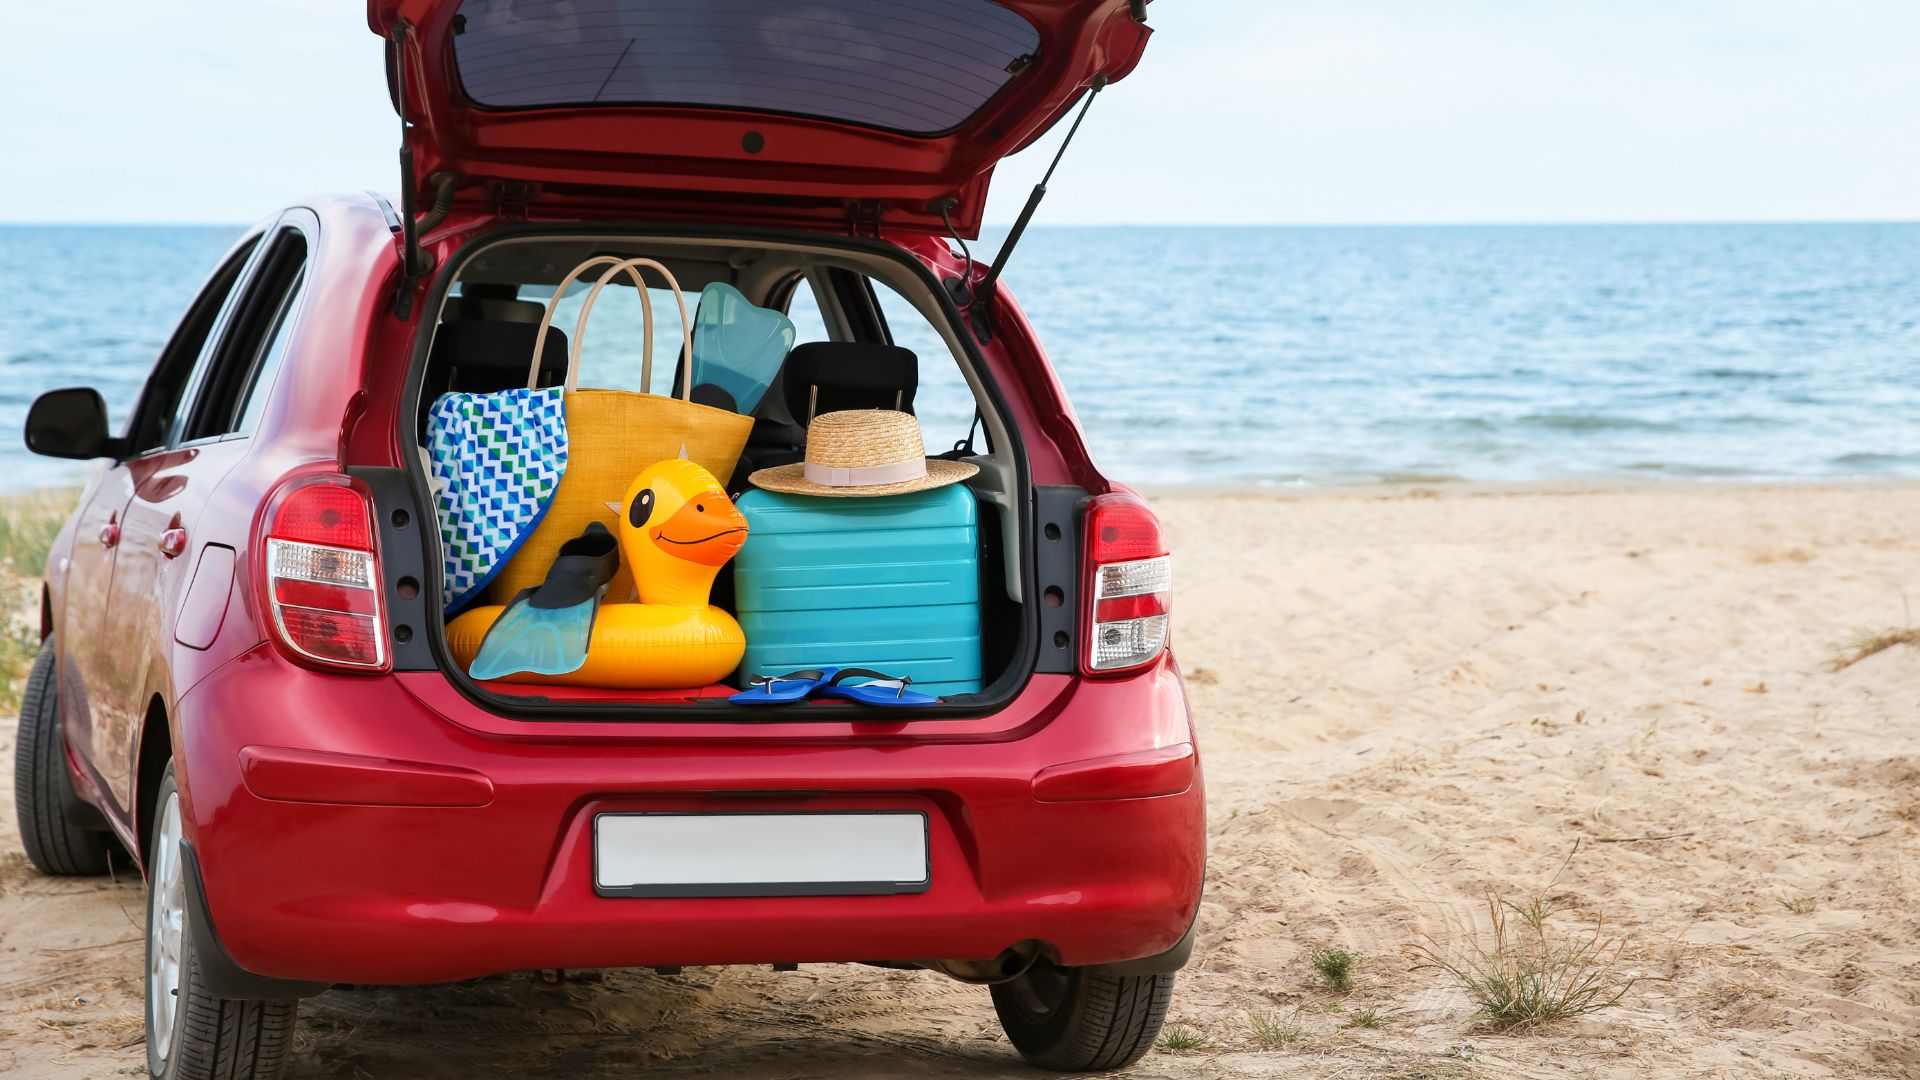 Shipping Your Car to a Vacation Destination: How to Make the Most of Your Trip